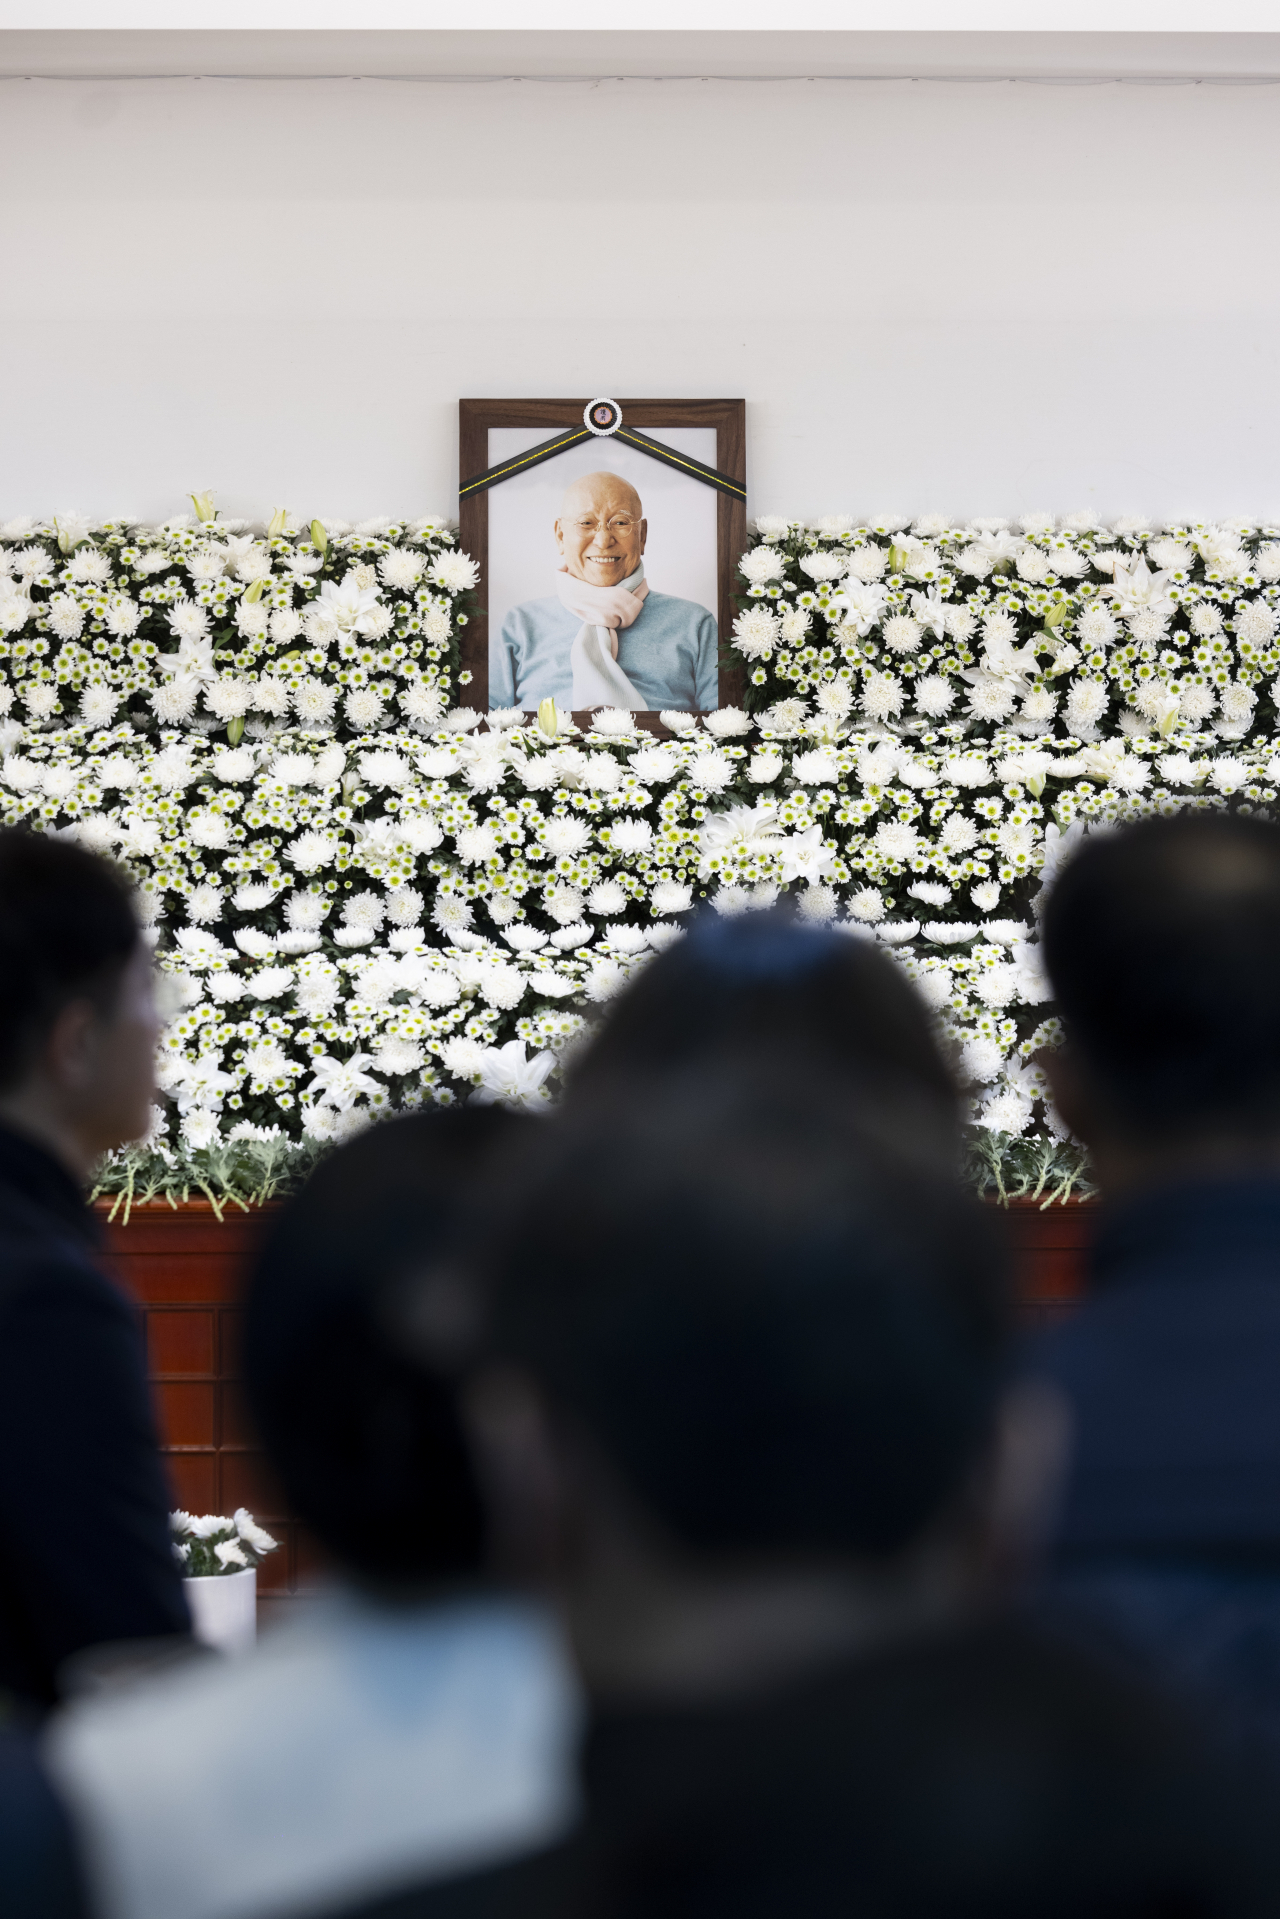 People visit a memorial ceremony dedicated to Park on Monday led by artist Ju Tae-seok and Suh Seung-won held at a funeral altar at Seoul National University Hospital in Seoul. (o-un)